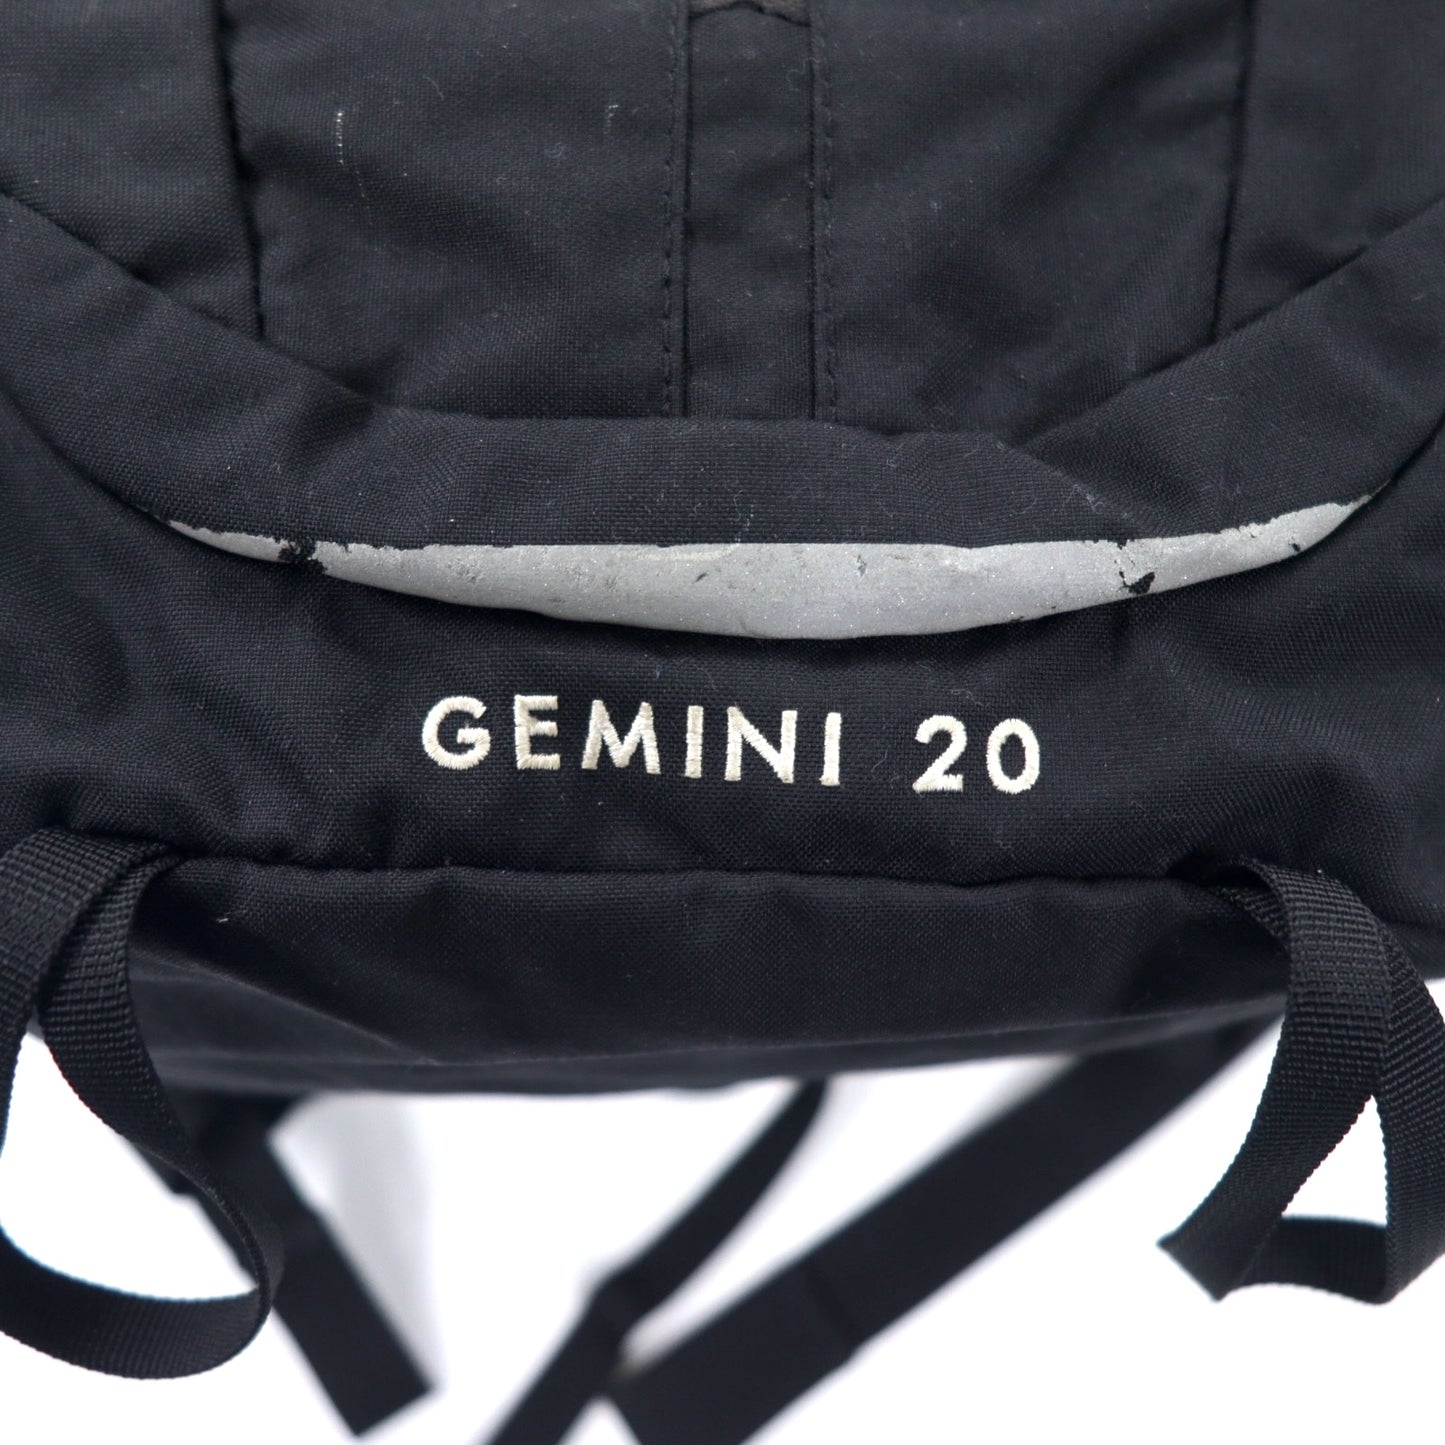 THE NORTH FACE ジェミニ20 バックパック リュックサック 22L ブラック ナイロン ロゴ刺繍 GEMINI20 DAY PACK NM71402